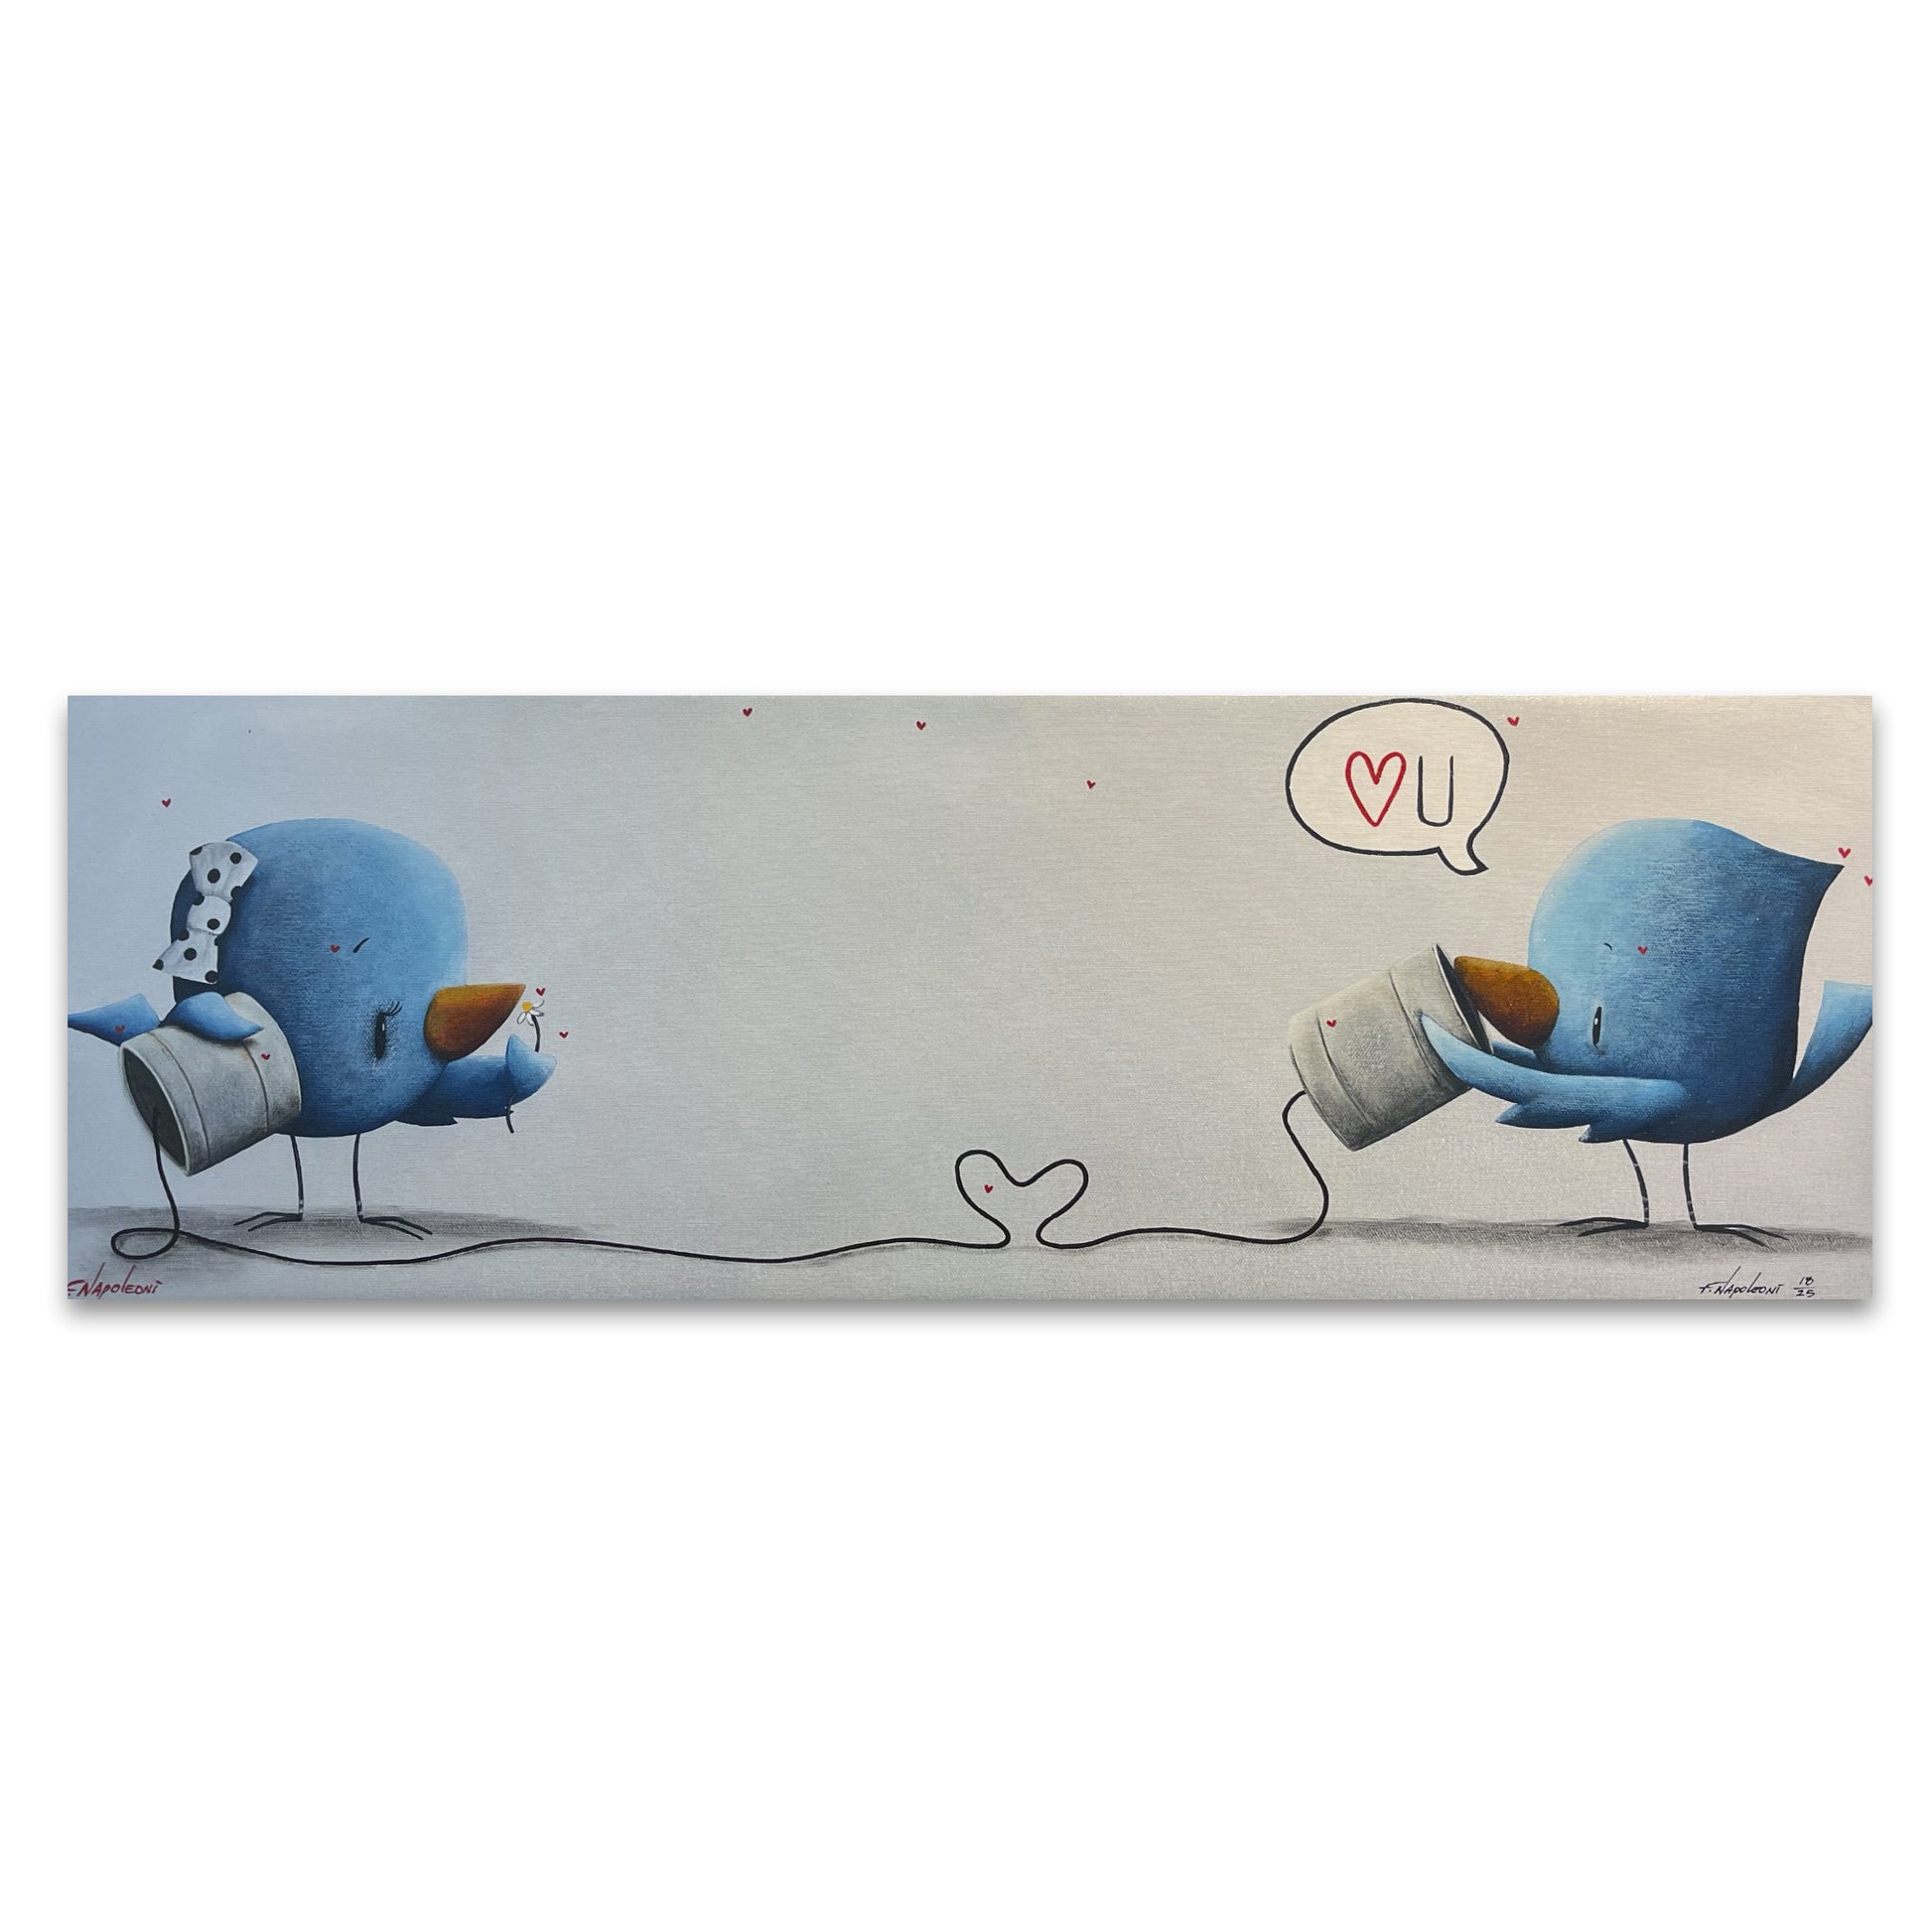 Fabio Napoleoni "The Sweetest Words" Limited Edition Paper Giclee